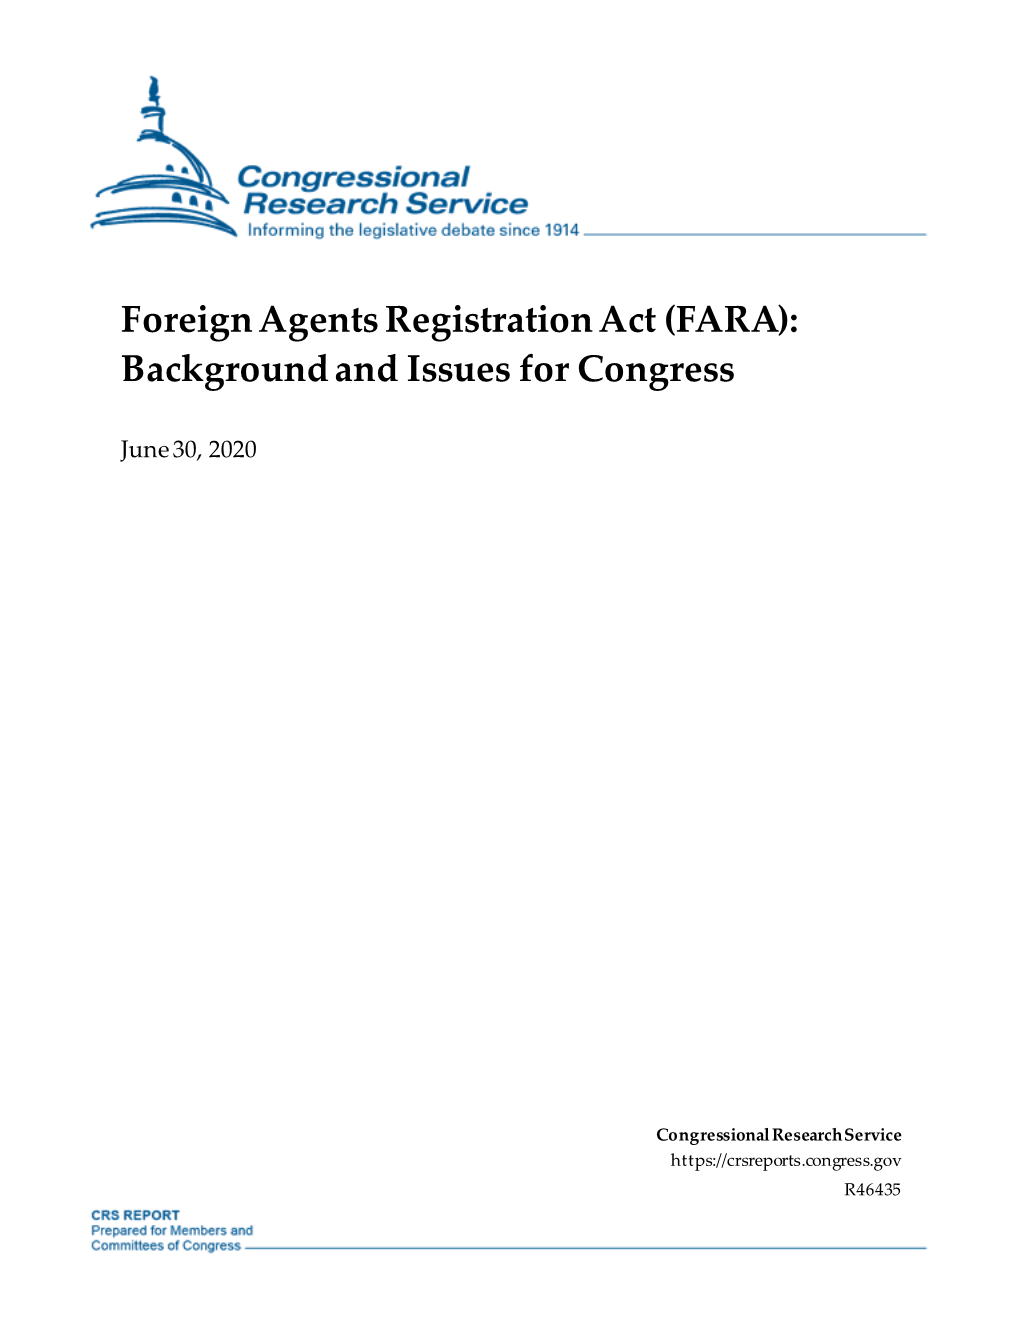 Foreign Agents Registration Act (FARA): Background and Issues for Congress